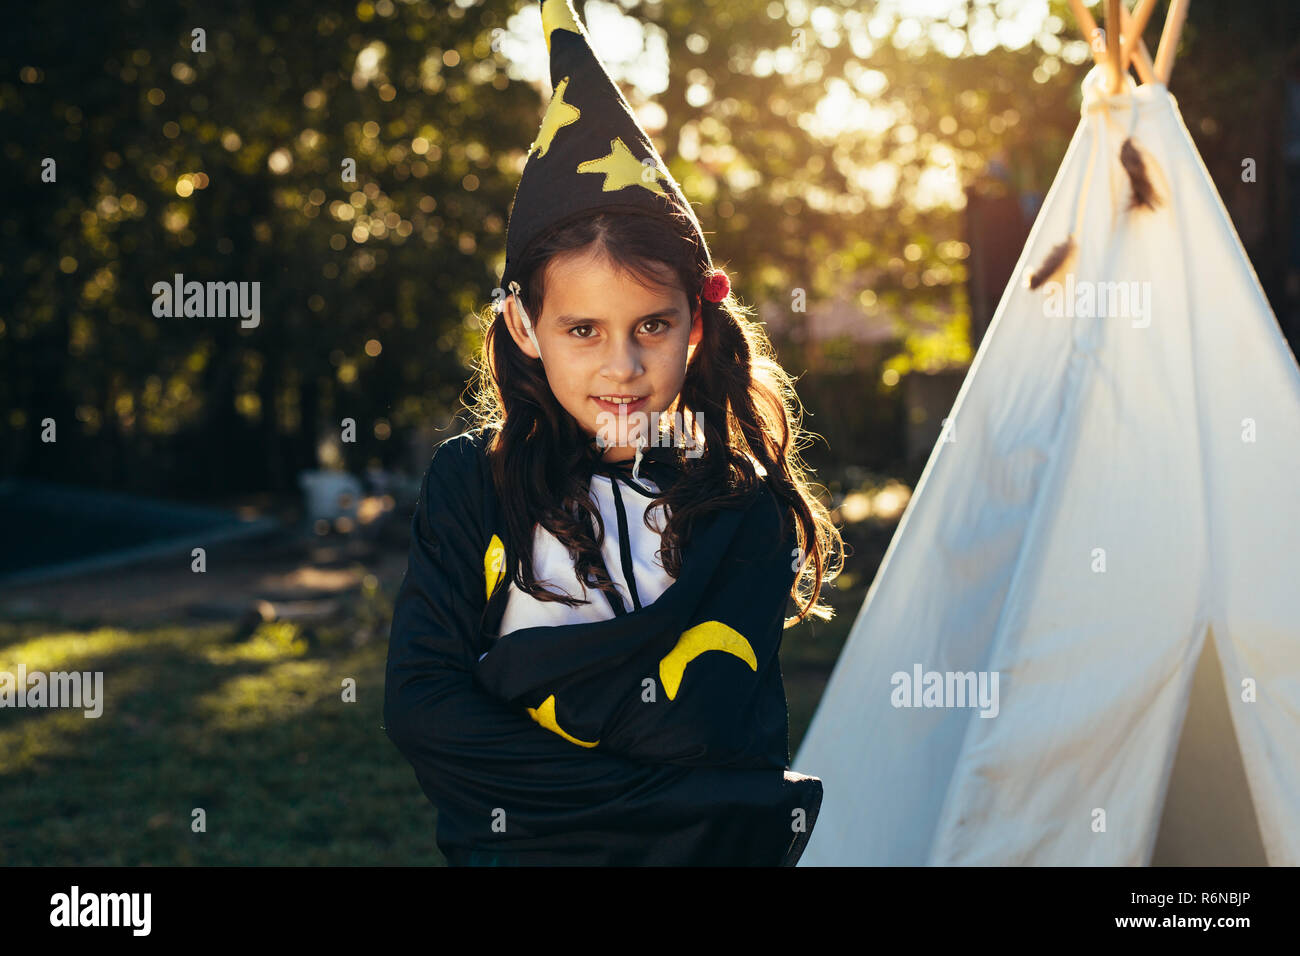 Cute little girl in wizard costume wearing hat with her arms crossed. Cute young little girl in halloween dress standing in backyard garden teepee in Stock Photo